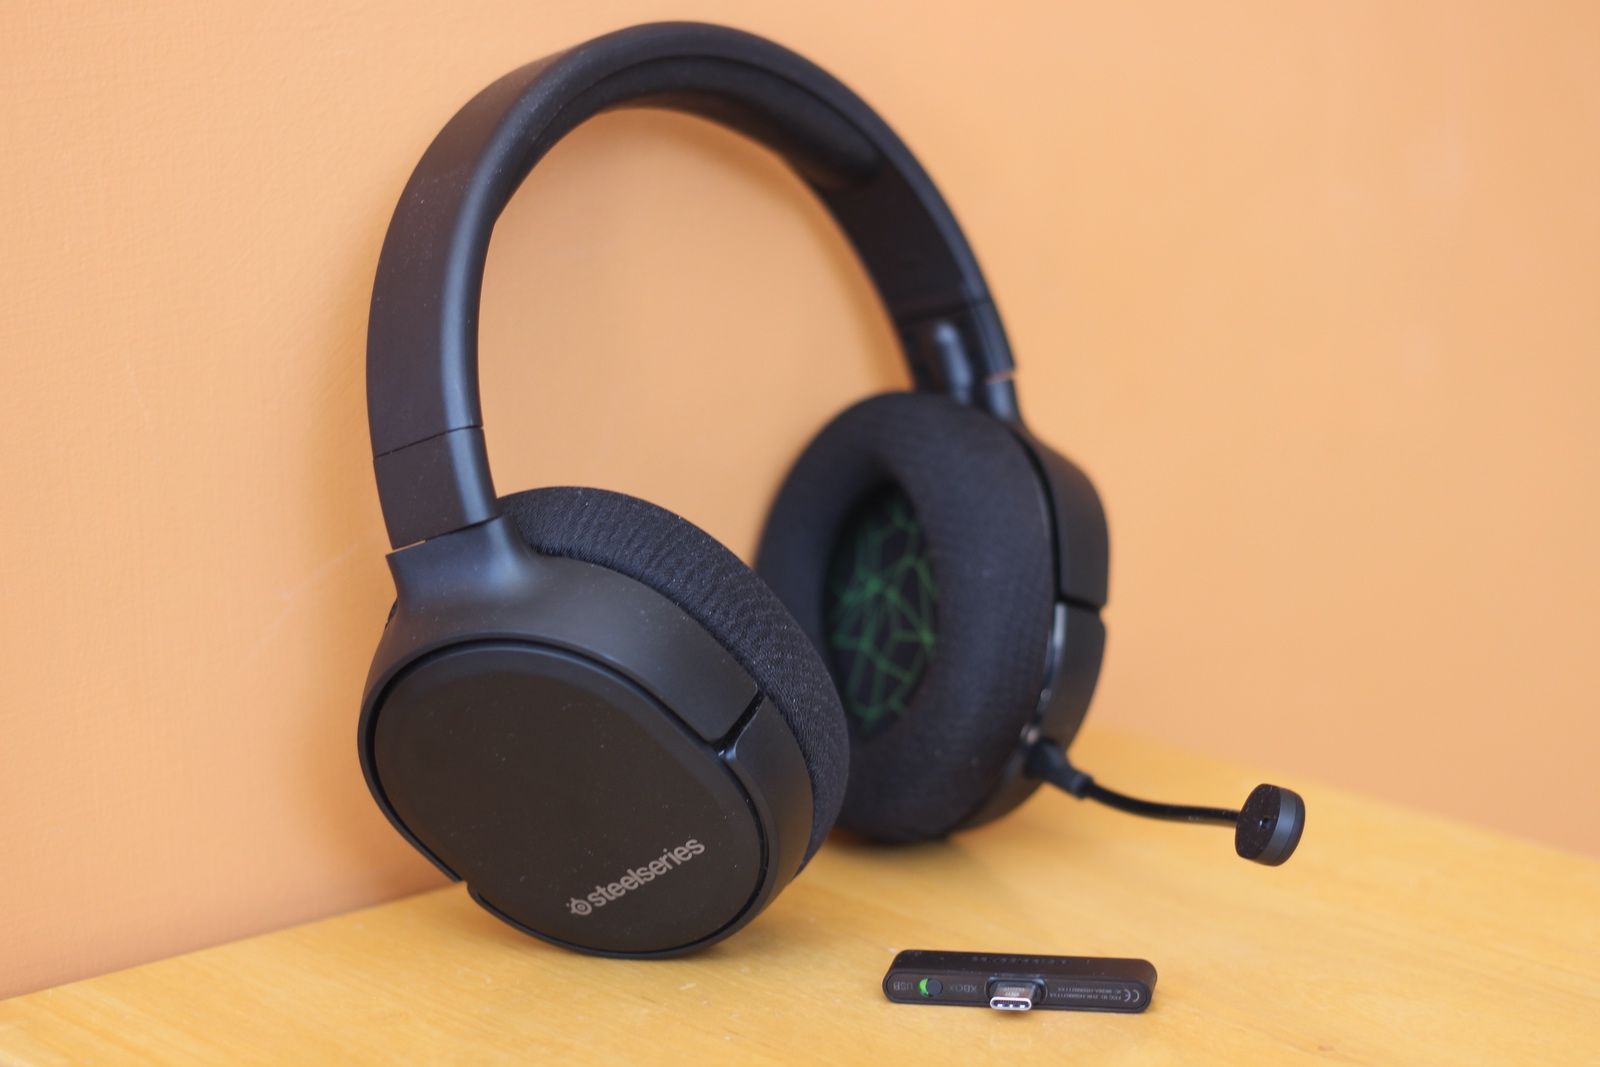 Get the perfect headset for your PS5 or Xbox Series X/S with Steelseries photo 2